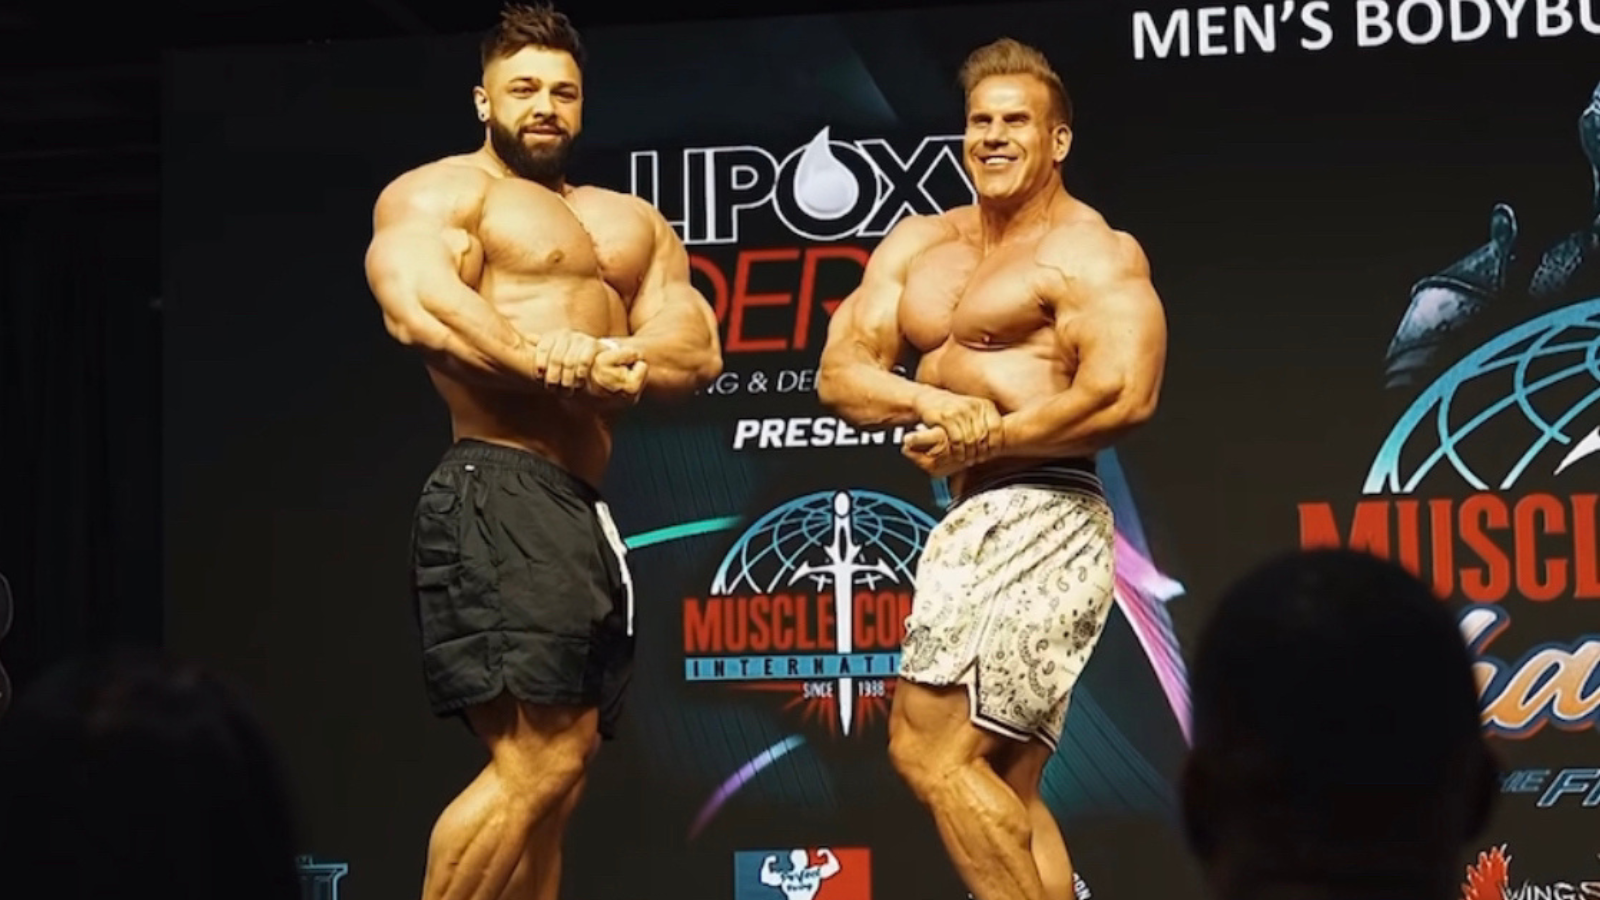 Jay Cutler Returns to the Mr. Olympia - IronMag Bodybuilding & Fitness Blog